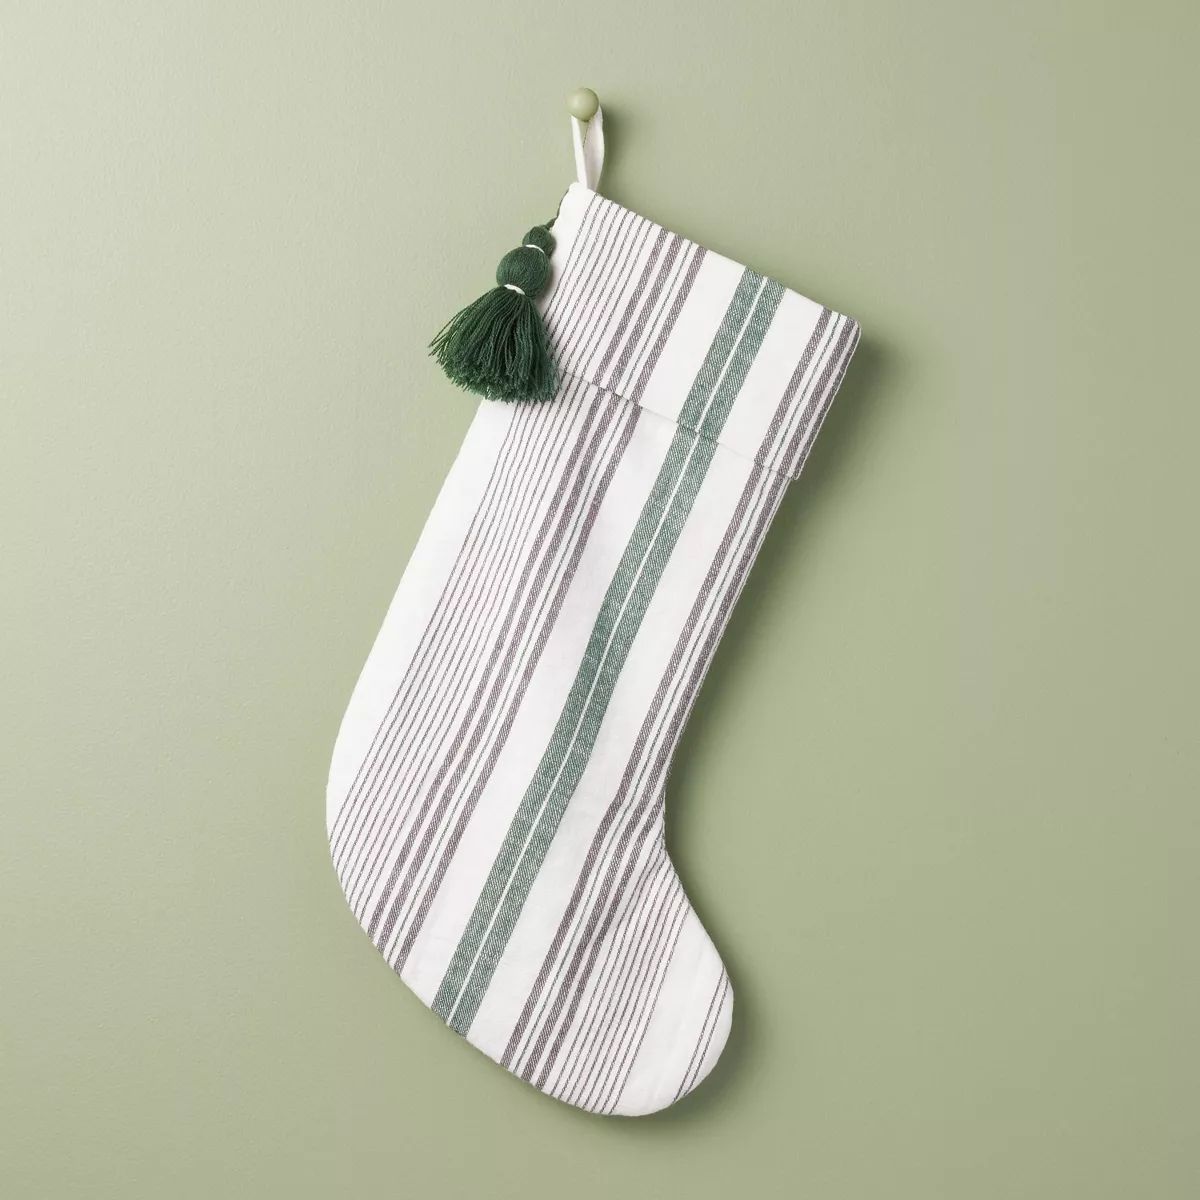 Textured Mix Stripe Christmas Stocking Green/Cream/Gray - Hearth & Hand™ with Magnolia | Target